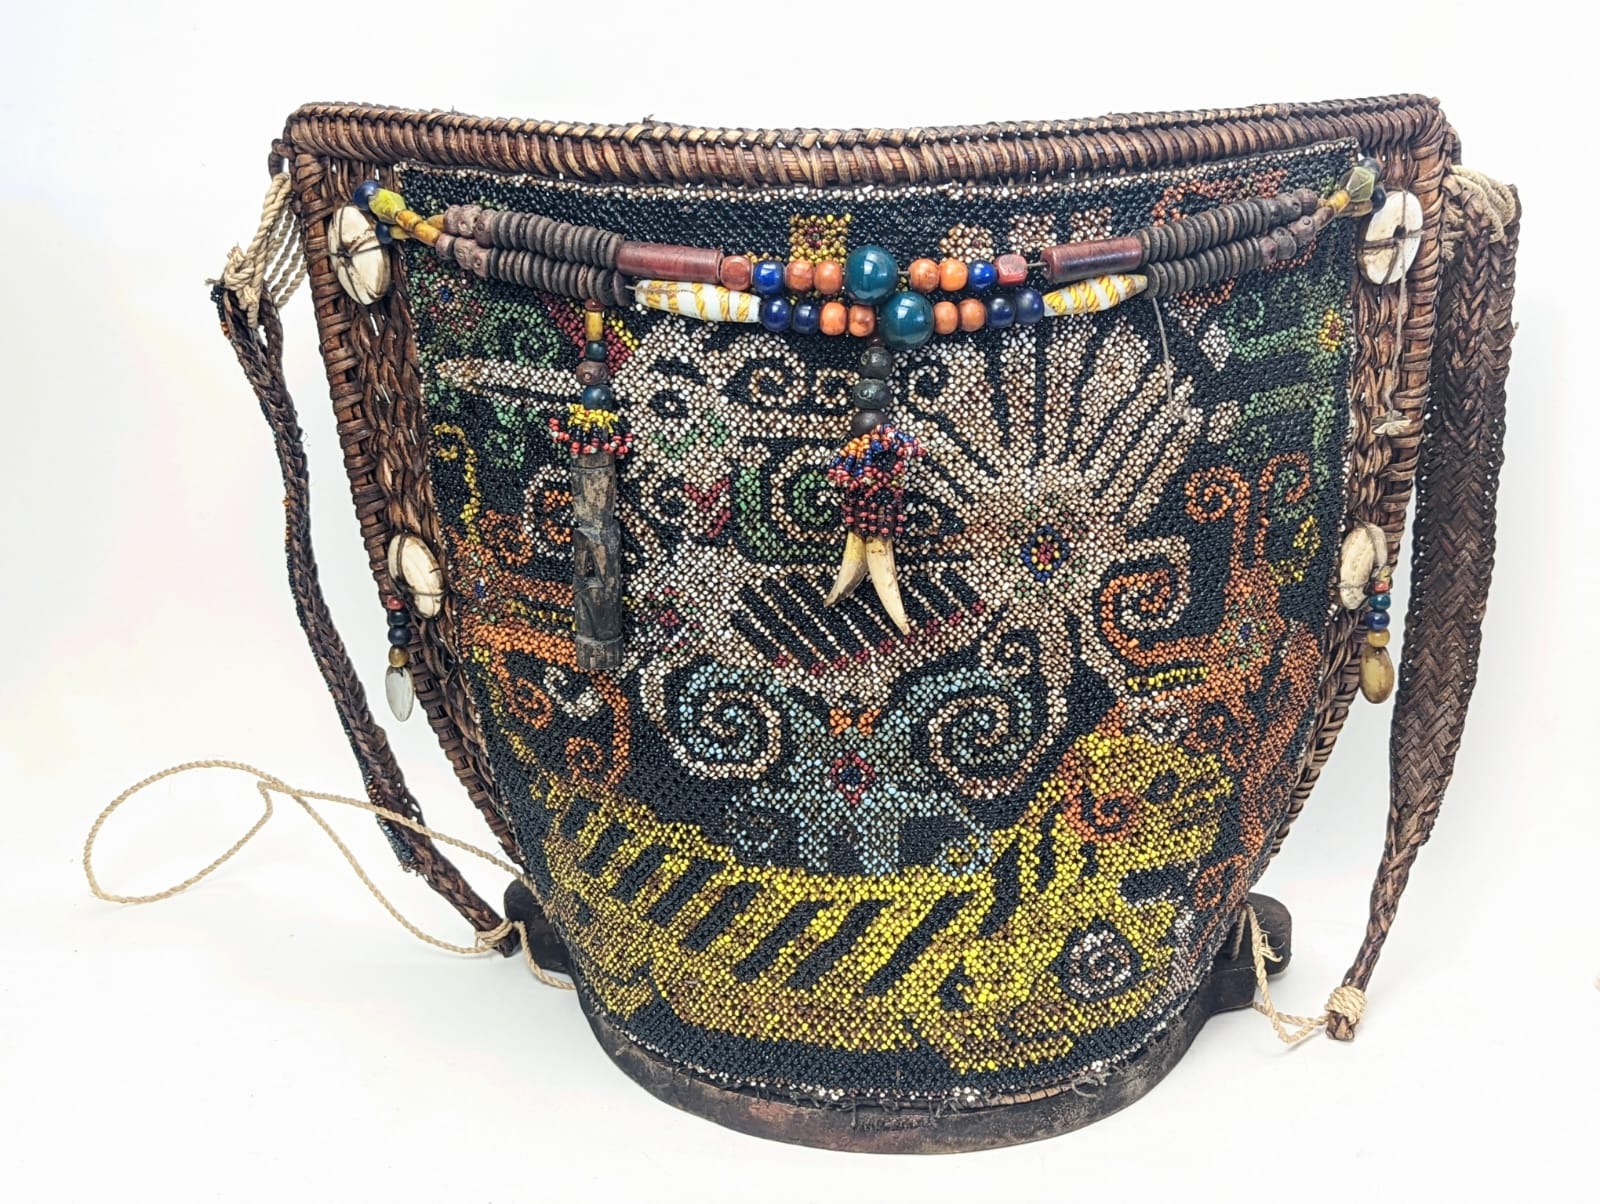 A Borneo Dayak tribal beaded baby carrier